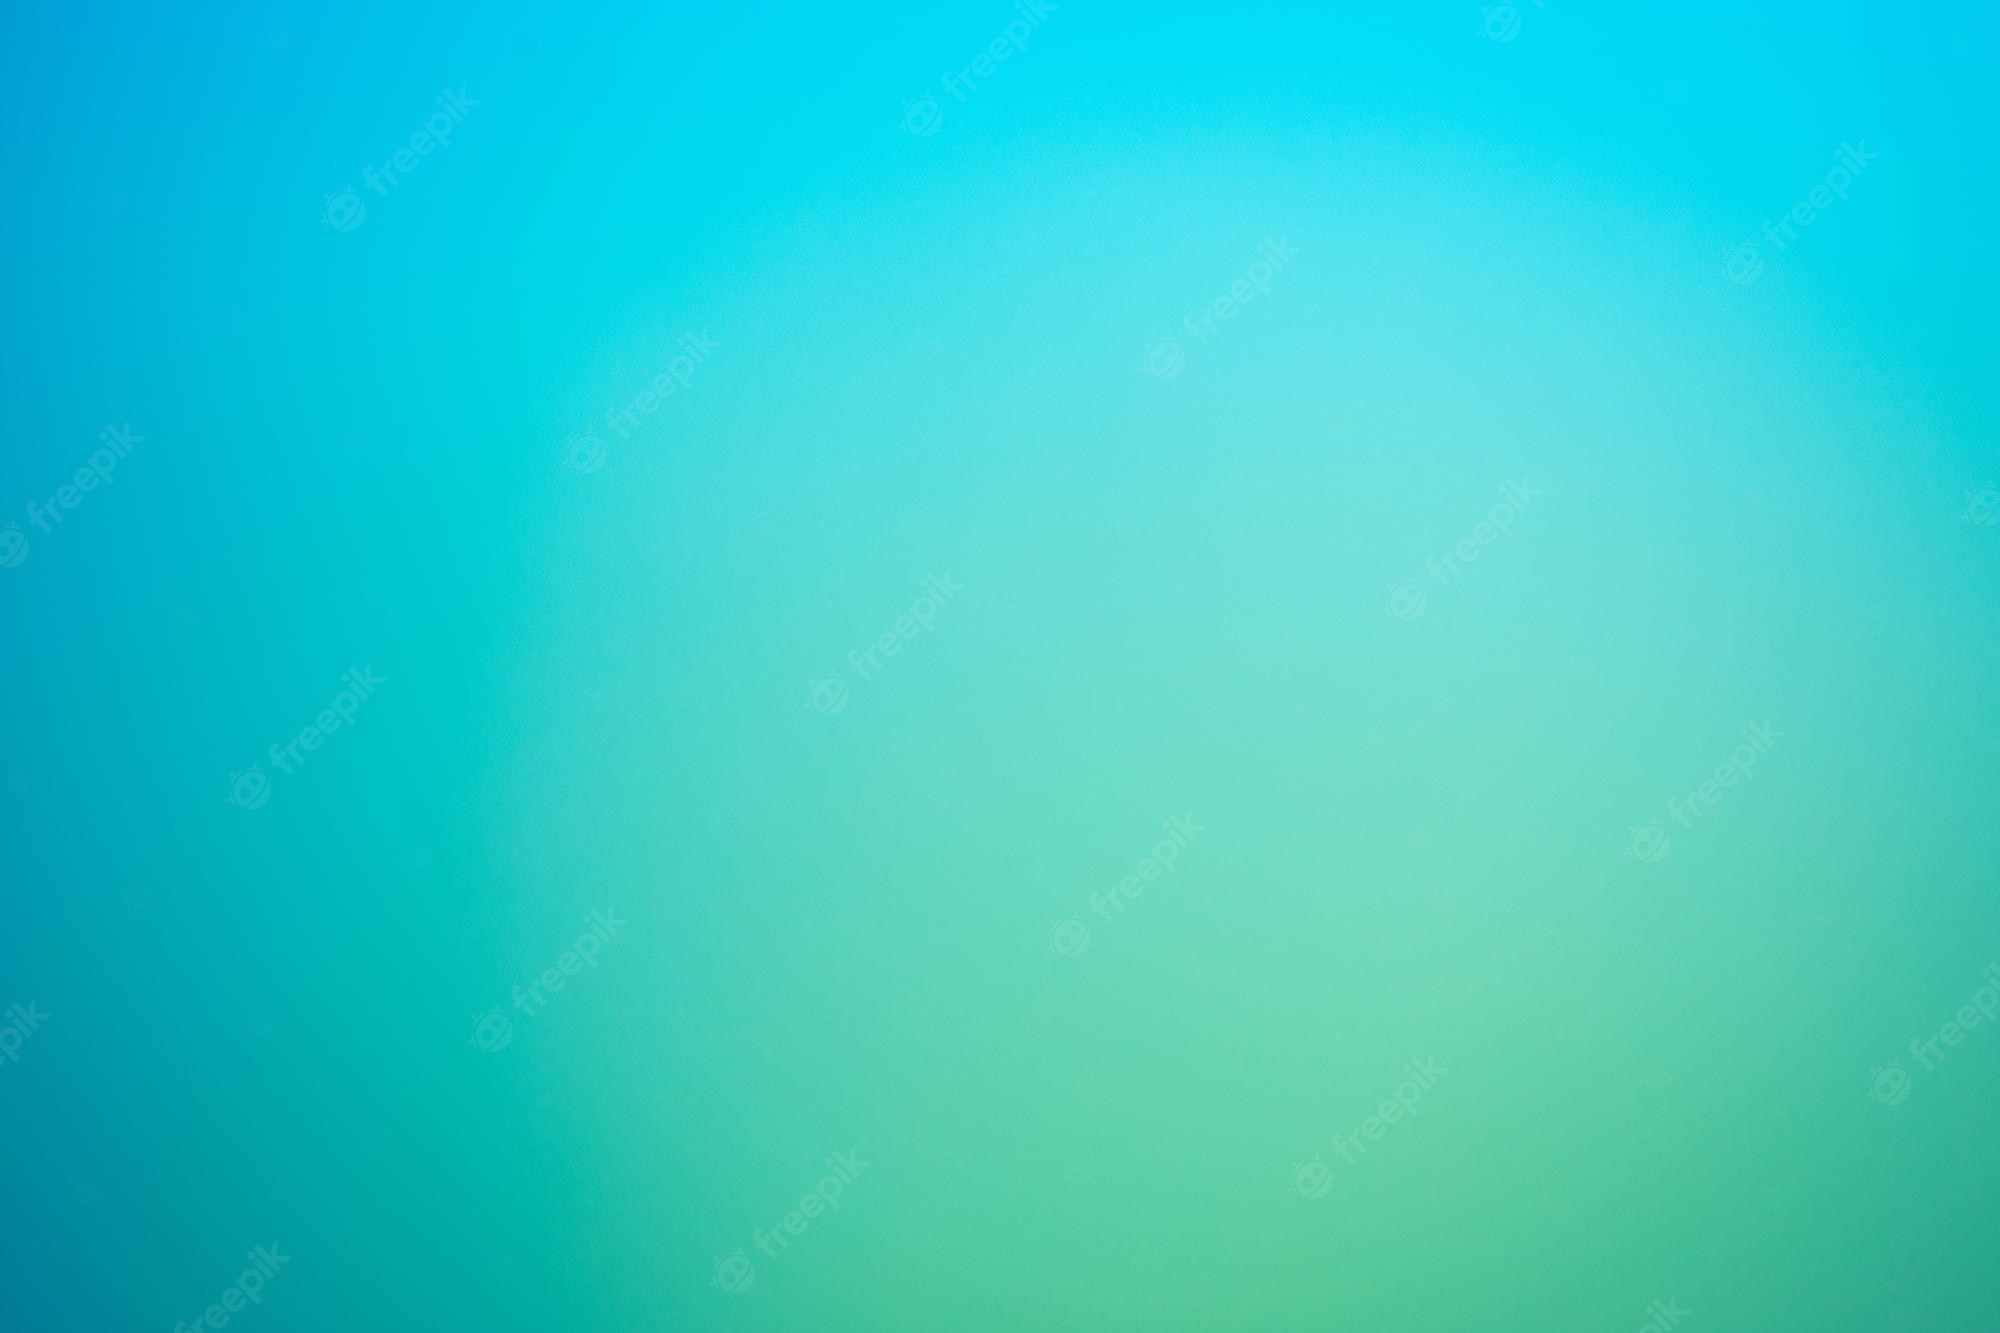 Purple And Teal Backgrounds